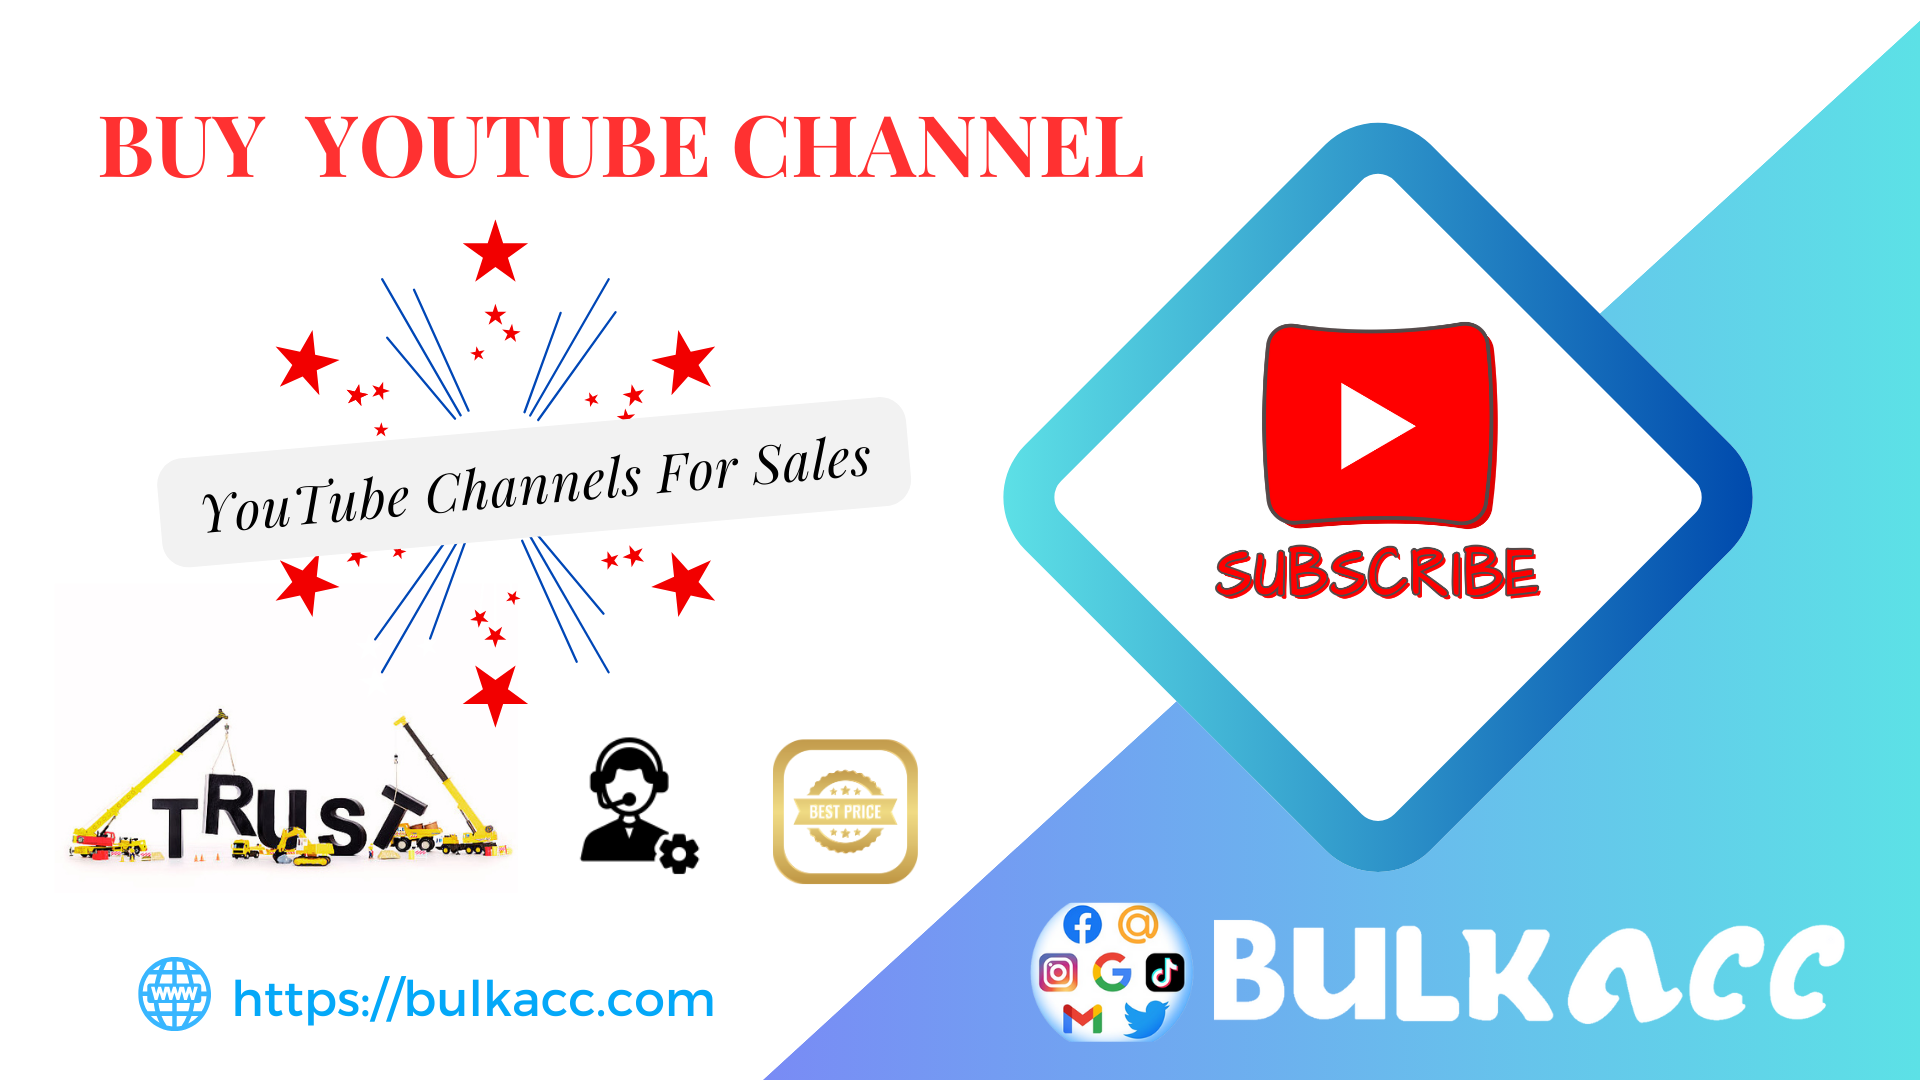 With the huge number of YouTube channels available, it will take a lot of time for you to create a prominent YouTube channel from scratch without subscribers. To speed up the process, you can buy a YouTube channel with thousands of available subscribers.